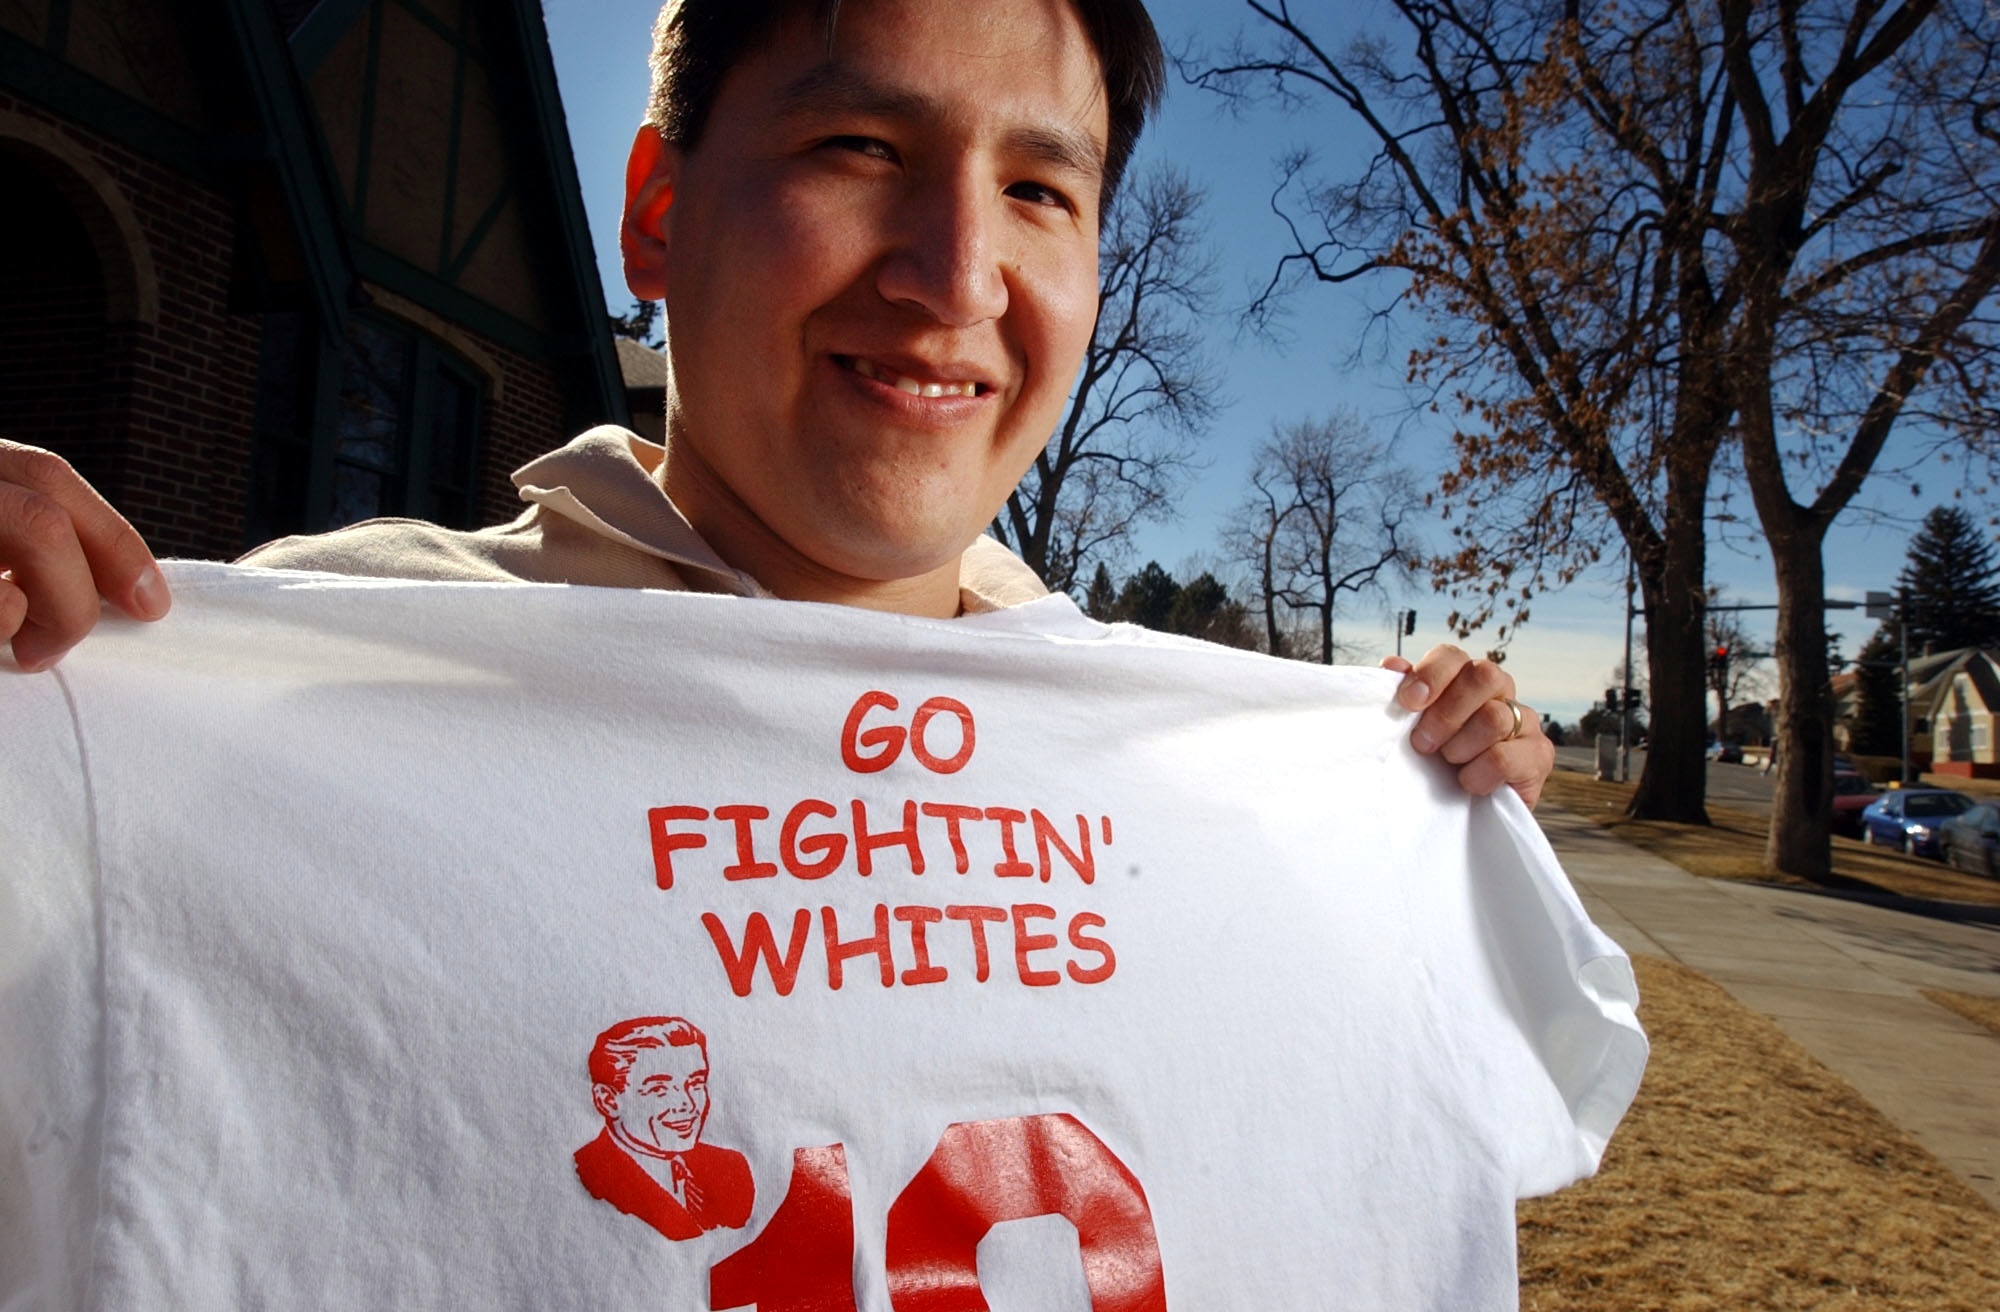 If You Think 'Redskins' is Bad, Wait Until You Hear About Those 'Fightin'  Whites